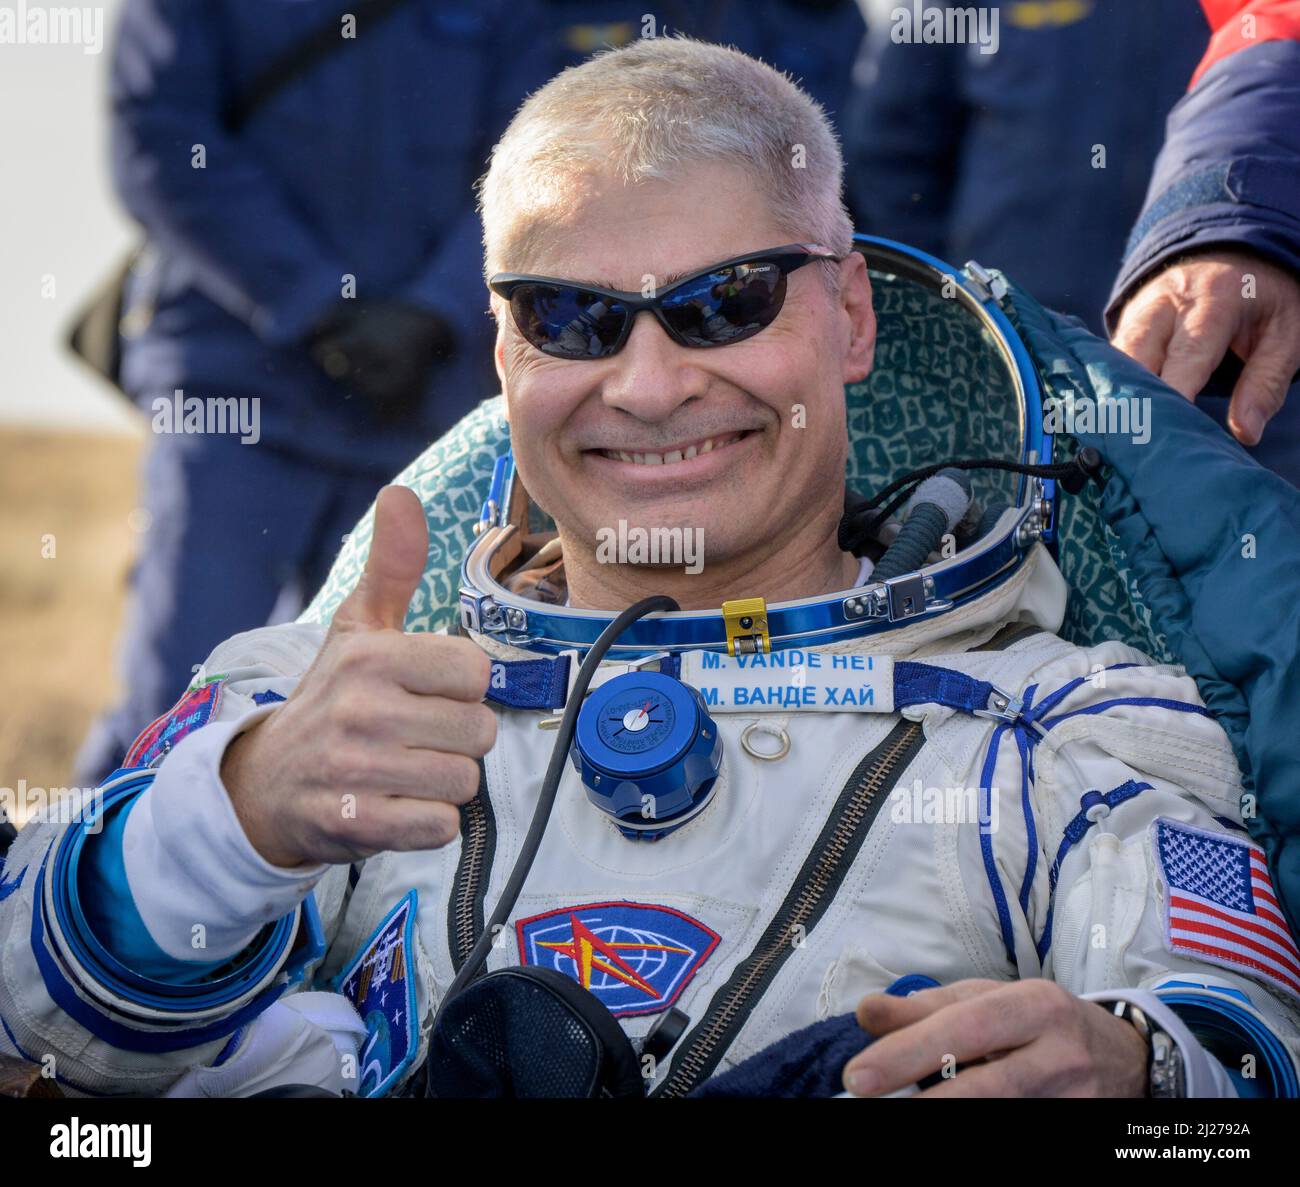 Zhezkazgan, Kazakhstan. 30th Mar, 2022. NASA astronaut Mark Vande Hei is seen outside the Soyuz MS-19 spacecraft after he landed with Russian cosmonauts Anton Shkaplerov and Pyotr Dubrov in a remote area near the town of Zhezkazgan, Kazakhstan on Wednesday, March 30, 2022. Vande Hei and Dubrov are returning to Earth after logging 355 days in space as members of Expeditions 64-66 aboard the International Space Station. Credit: dpa picture alliance/Alamy Live News Stock Photo